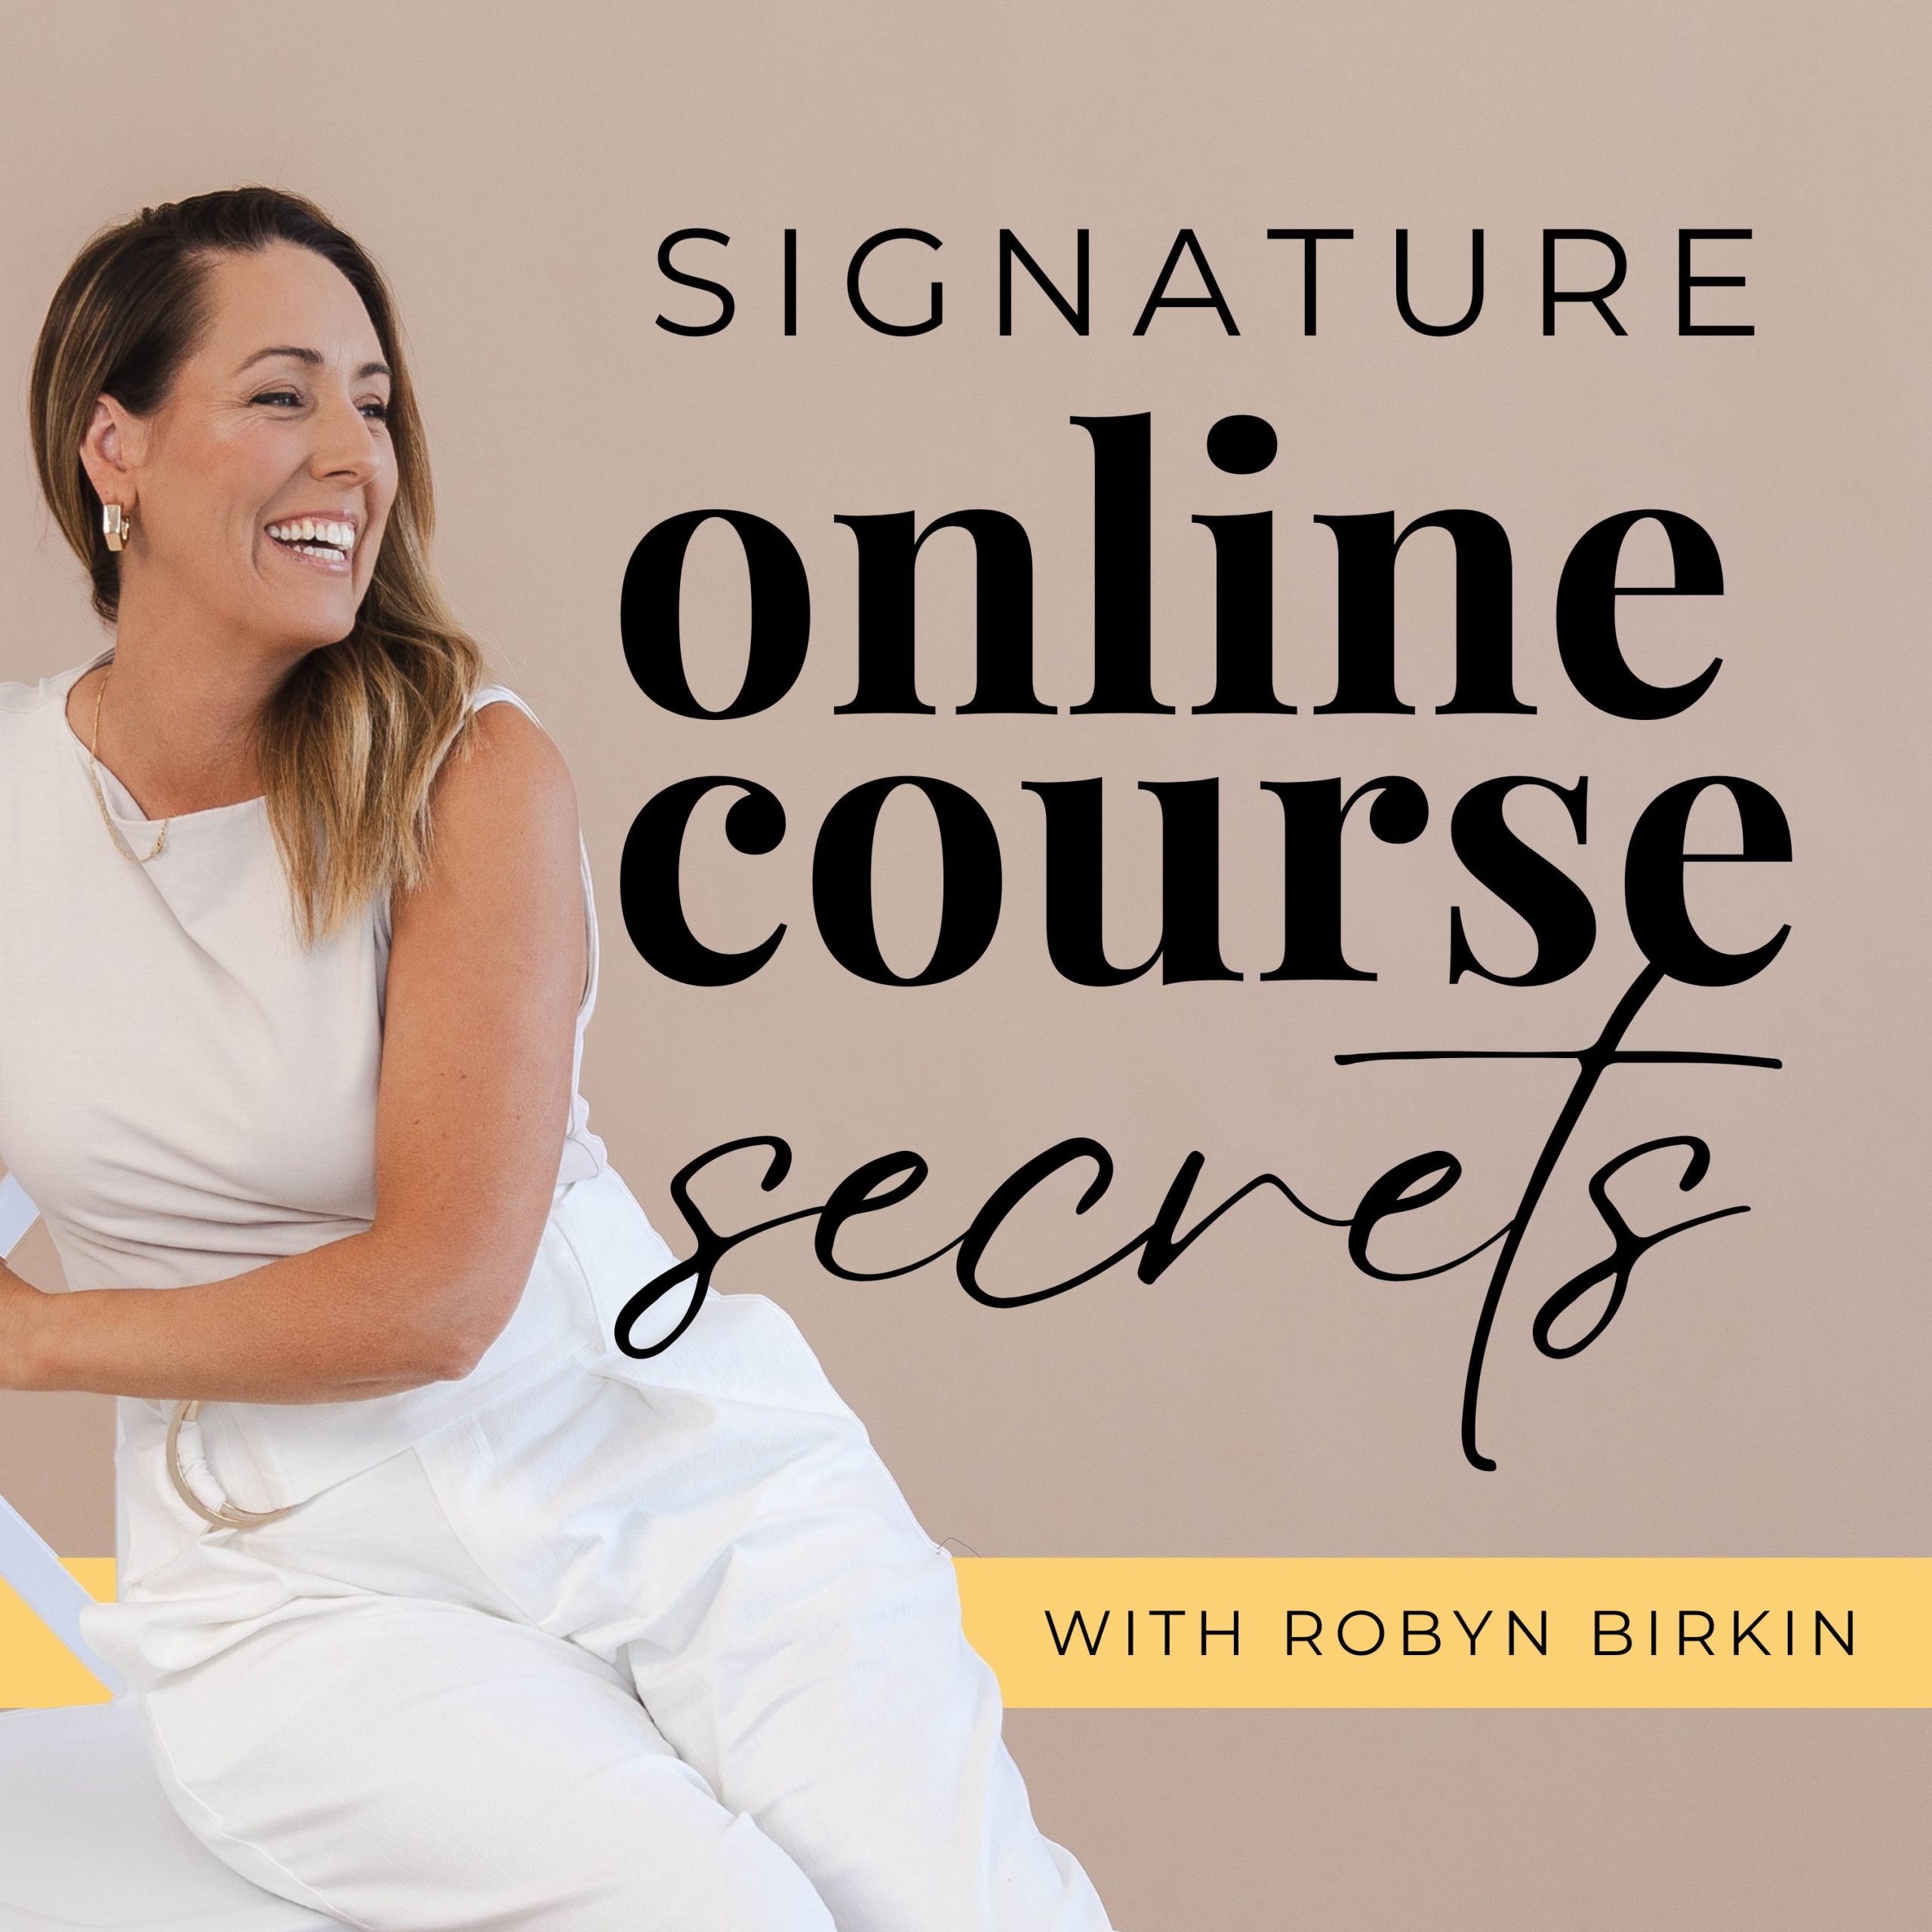 Signature Online Course Secrets Podcast by Robyn Birkin